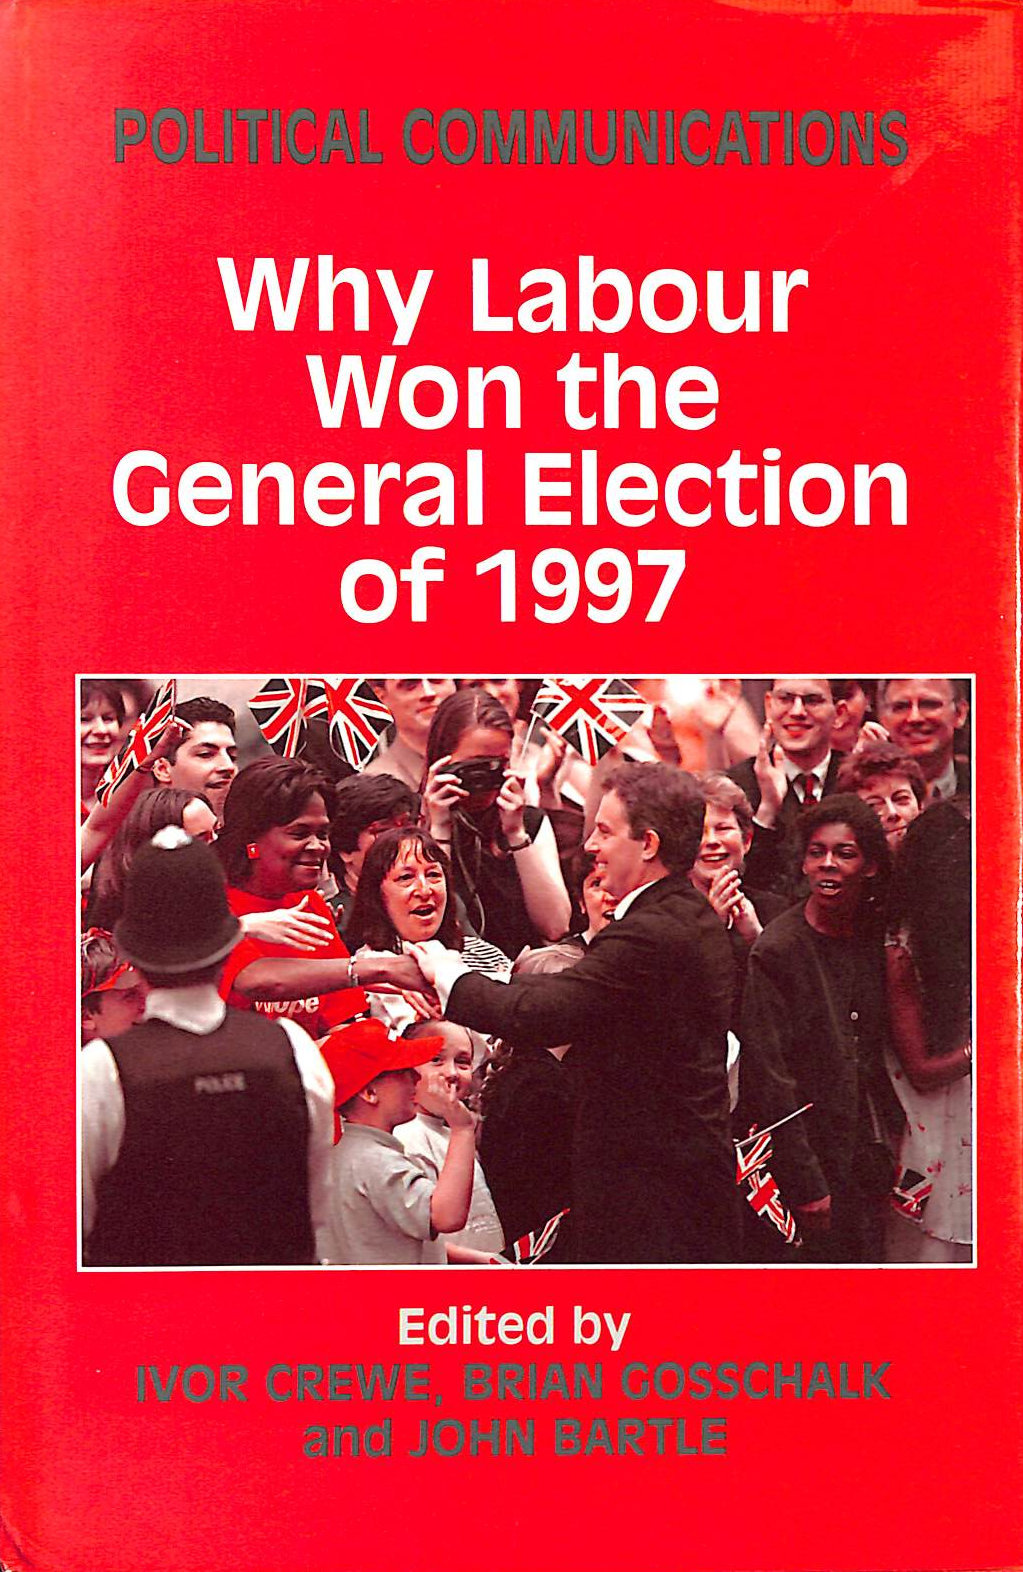 VARIOUS - Political Communications: Why Labour Won the General Election of 1997